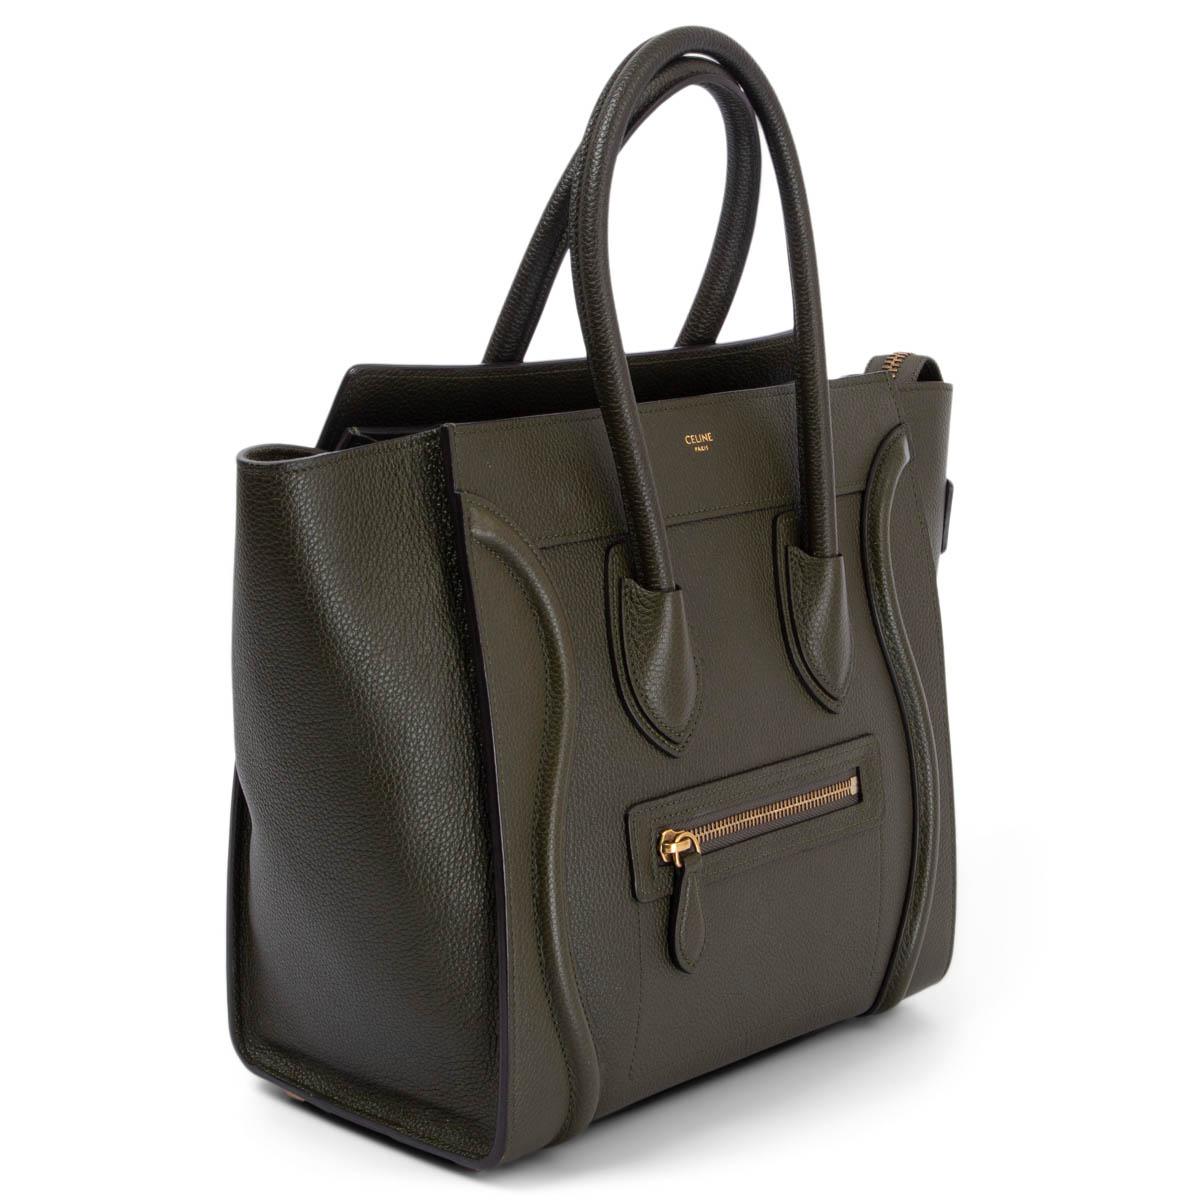 100% authentic Céline Micro Luggage in olive green grained calfskin. Opens with a zipper on top and is lined in olive green suede leather with two open pockets against the front and one zipper pocket against the back. Has been carried and is in